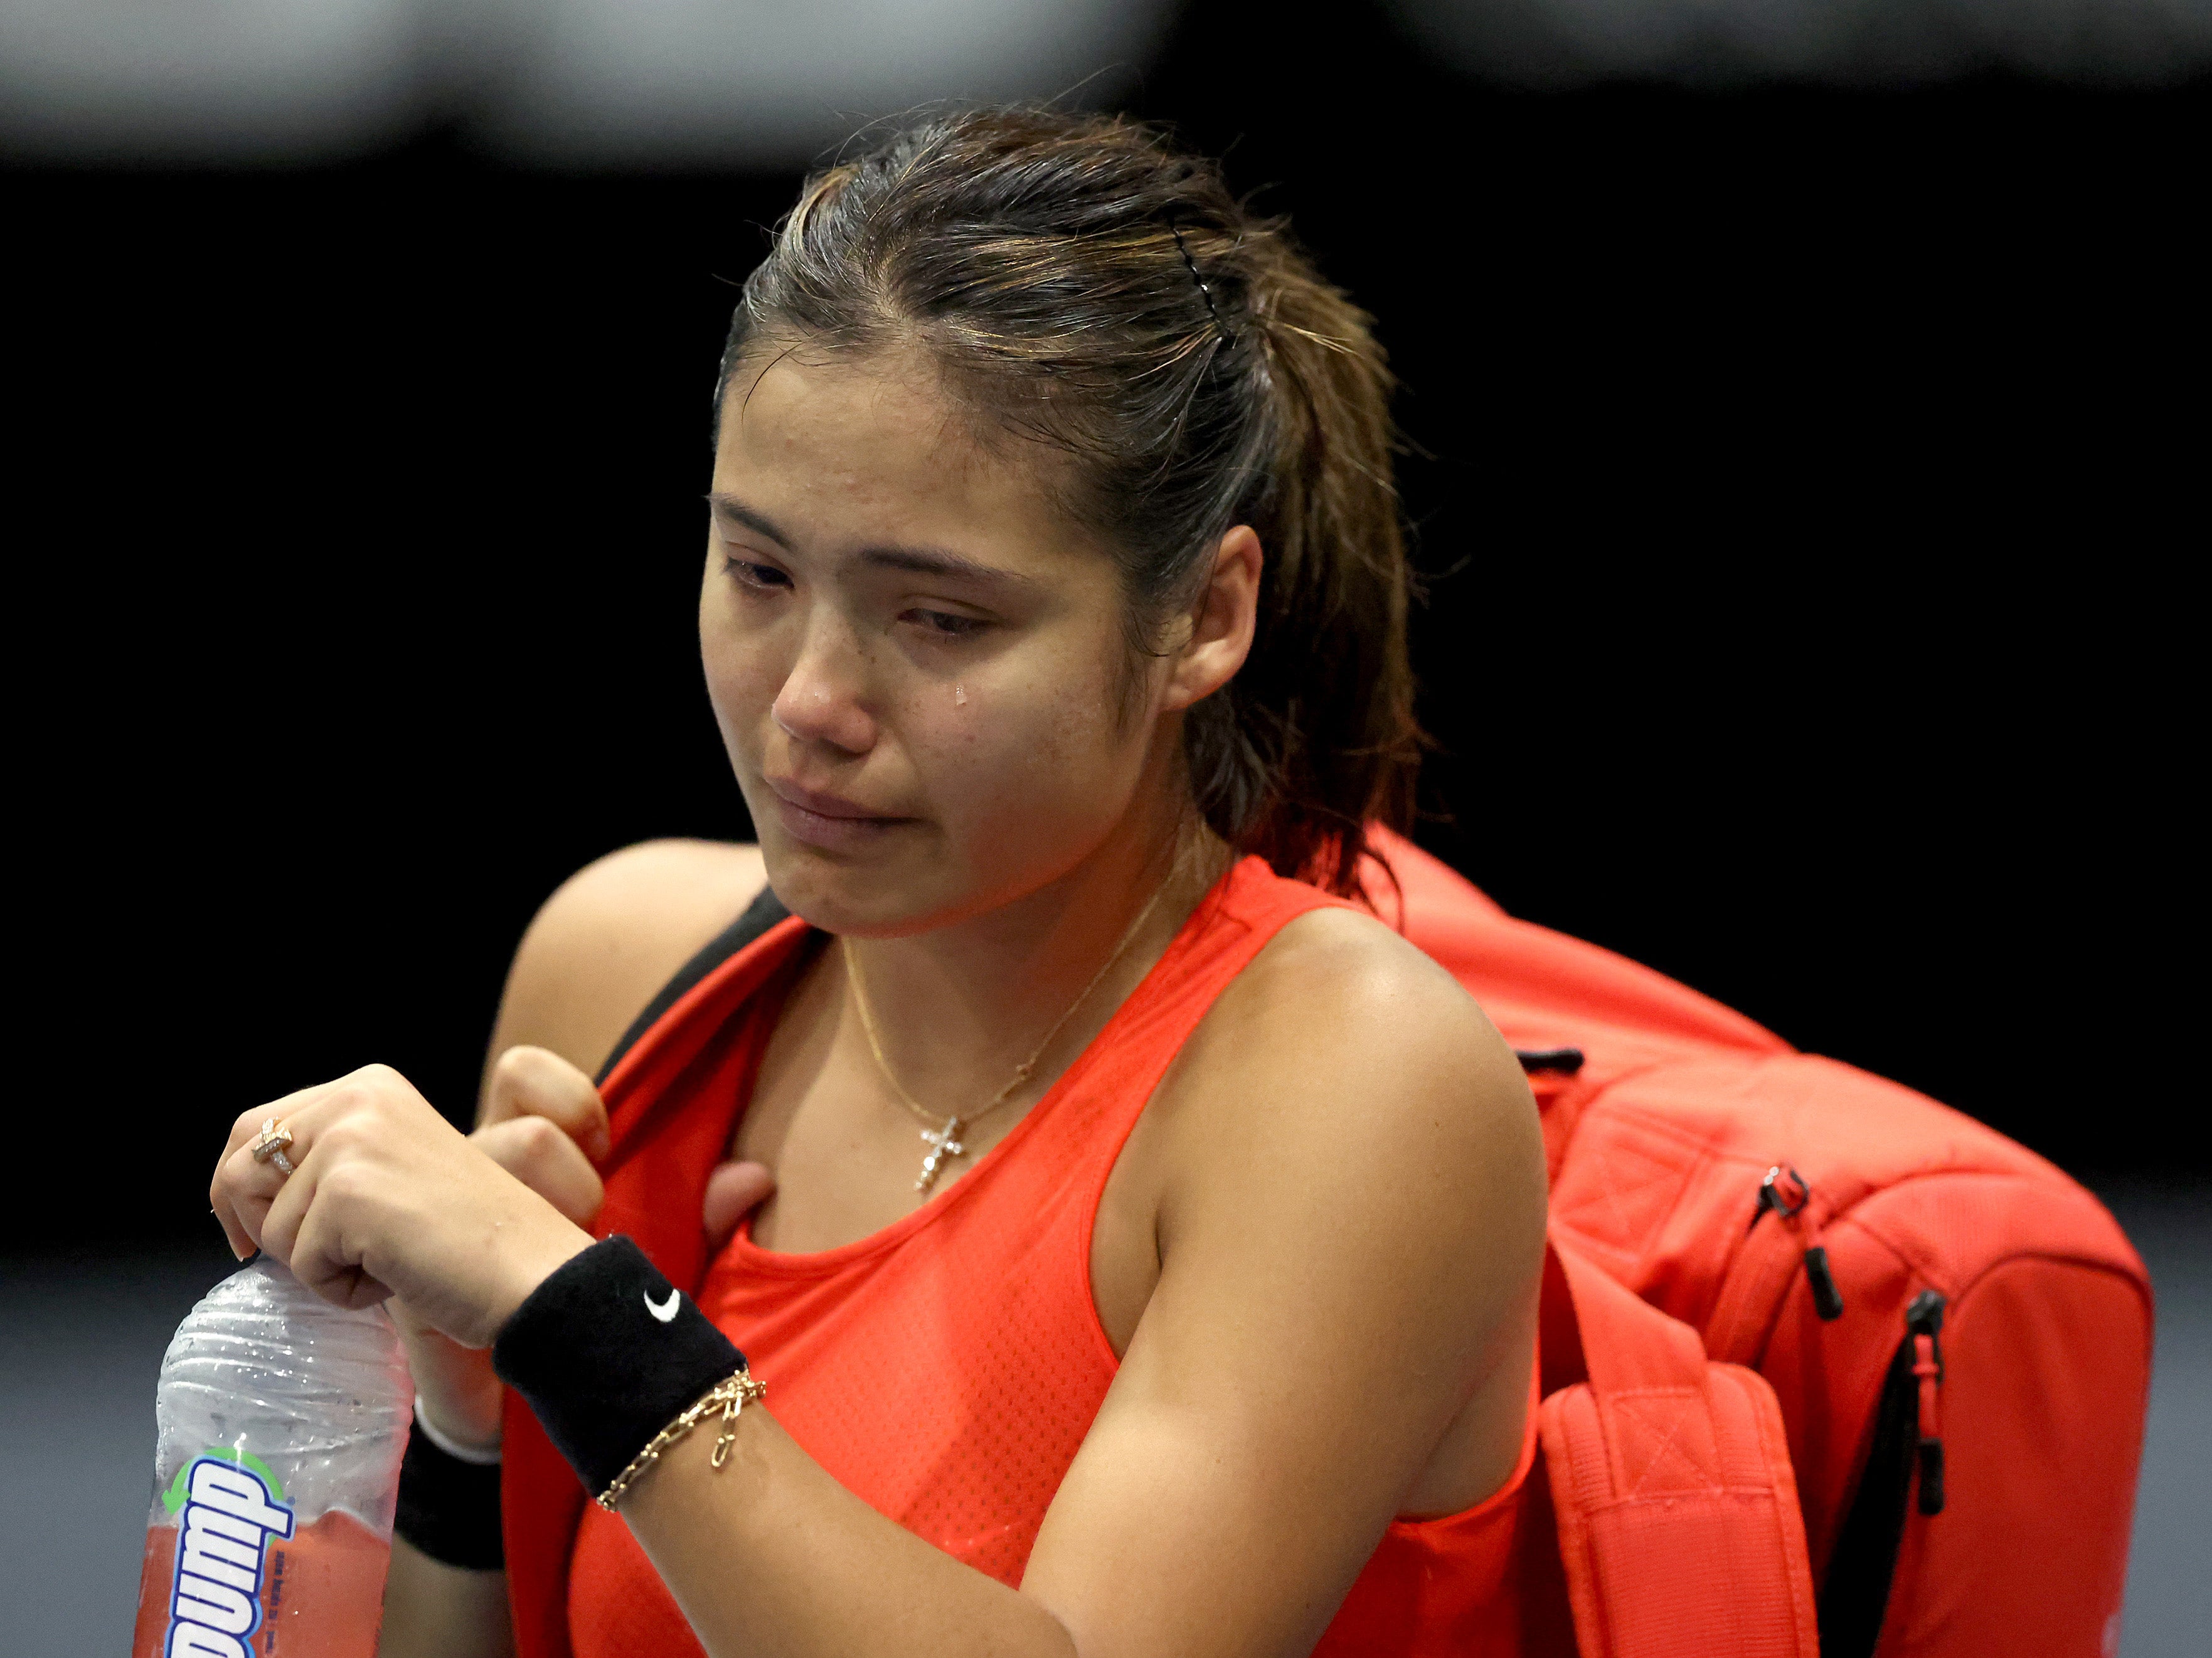 The British number one was in tears as she was forced to withdraw from her second-round match in Auckland